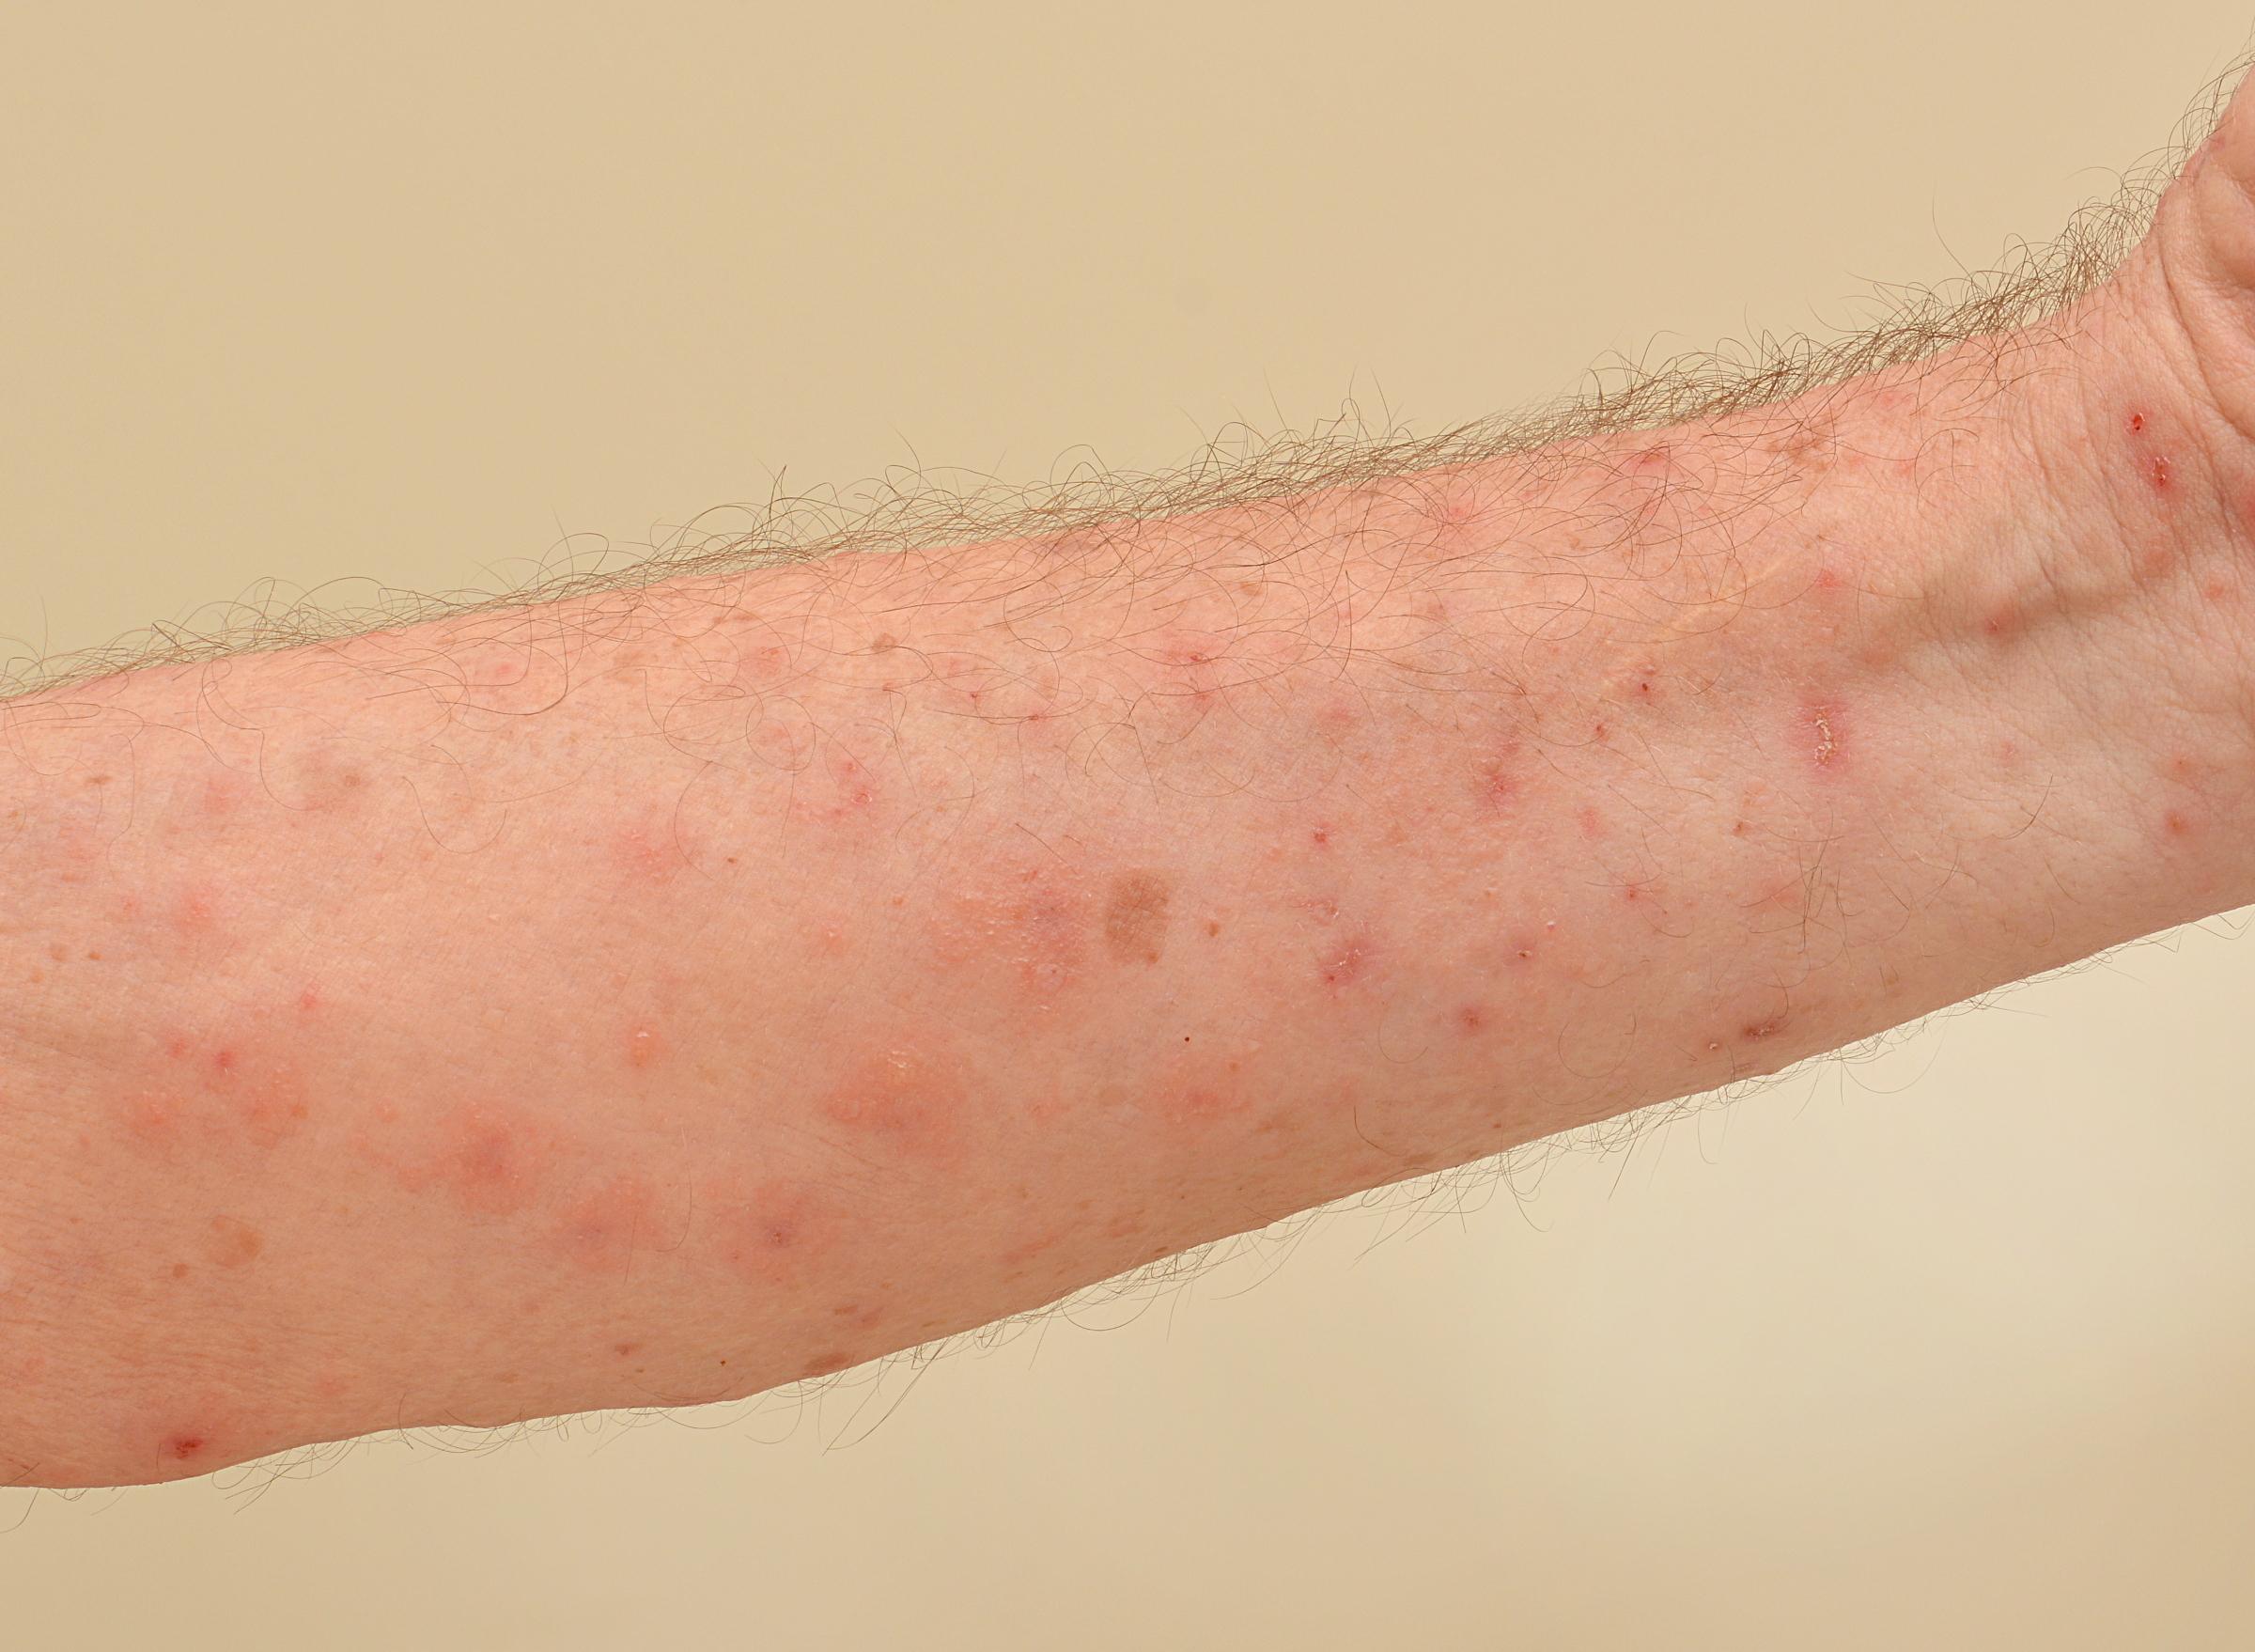 What causes scabies in nursing homes